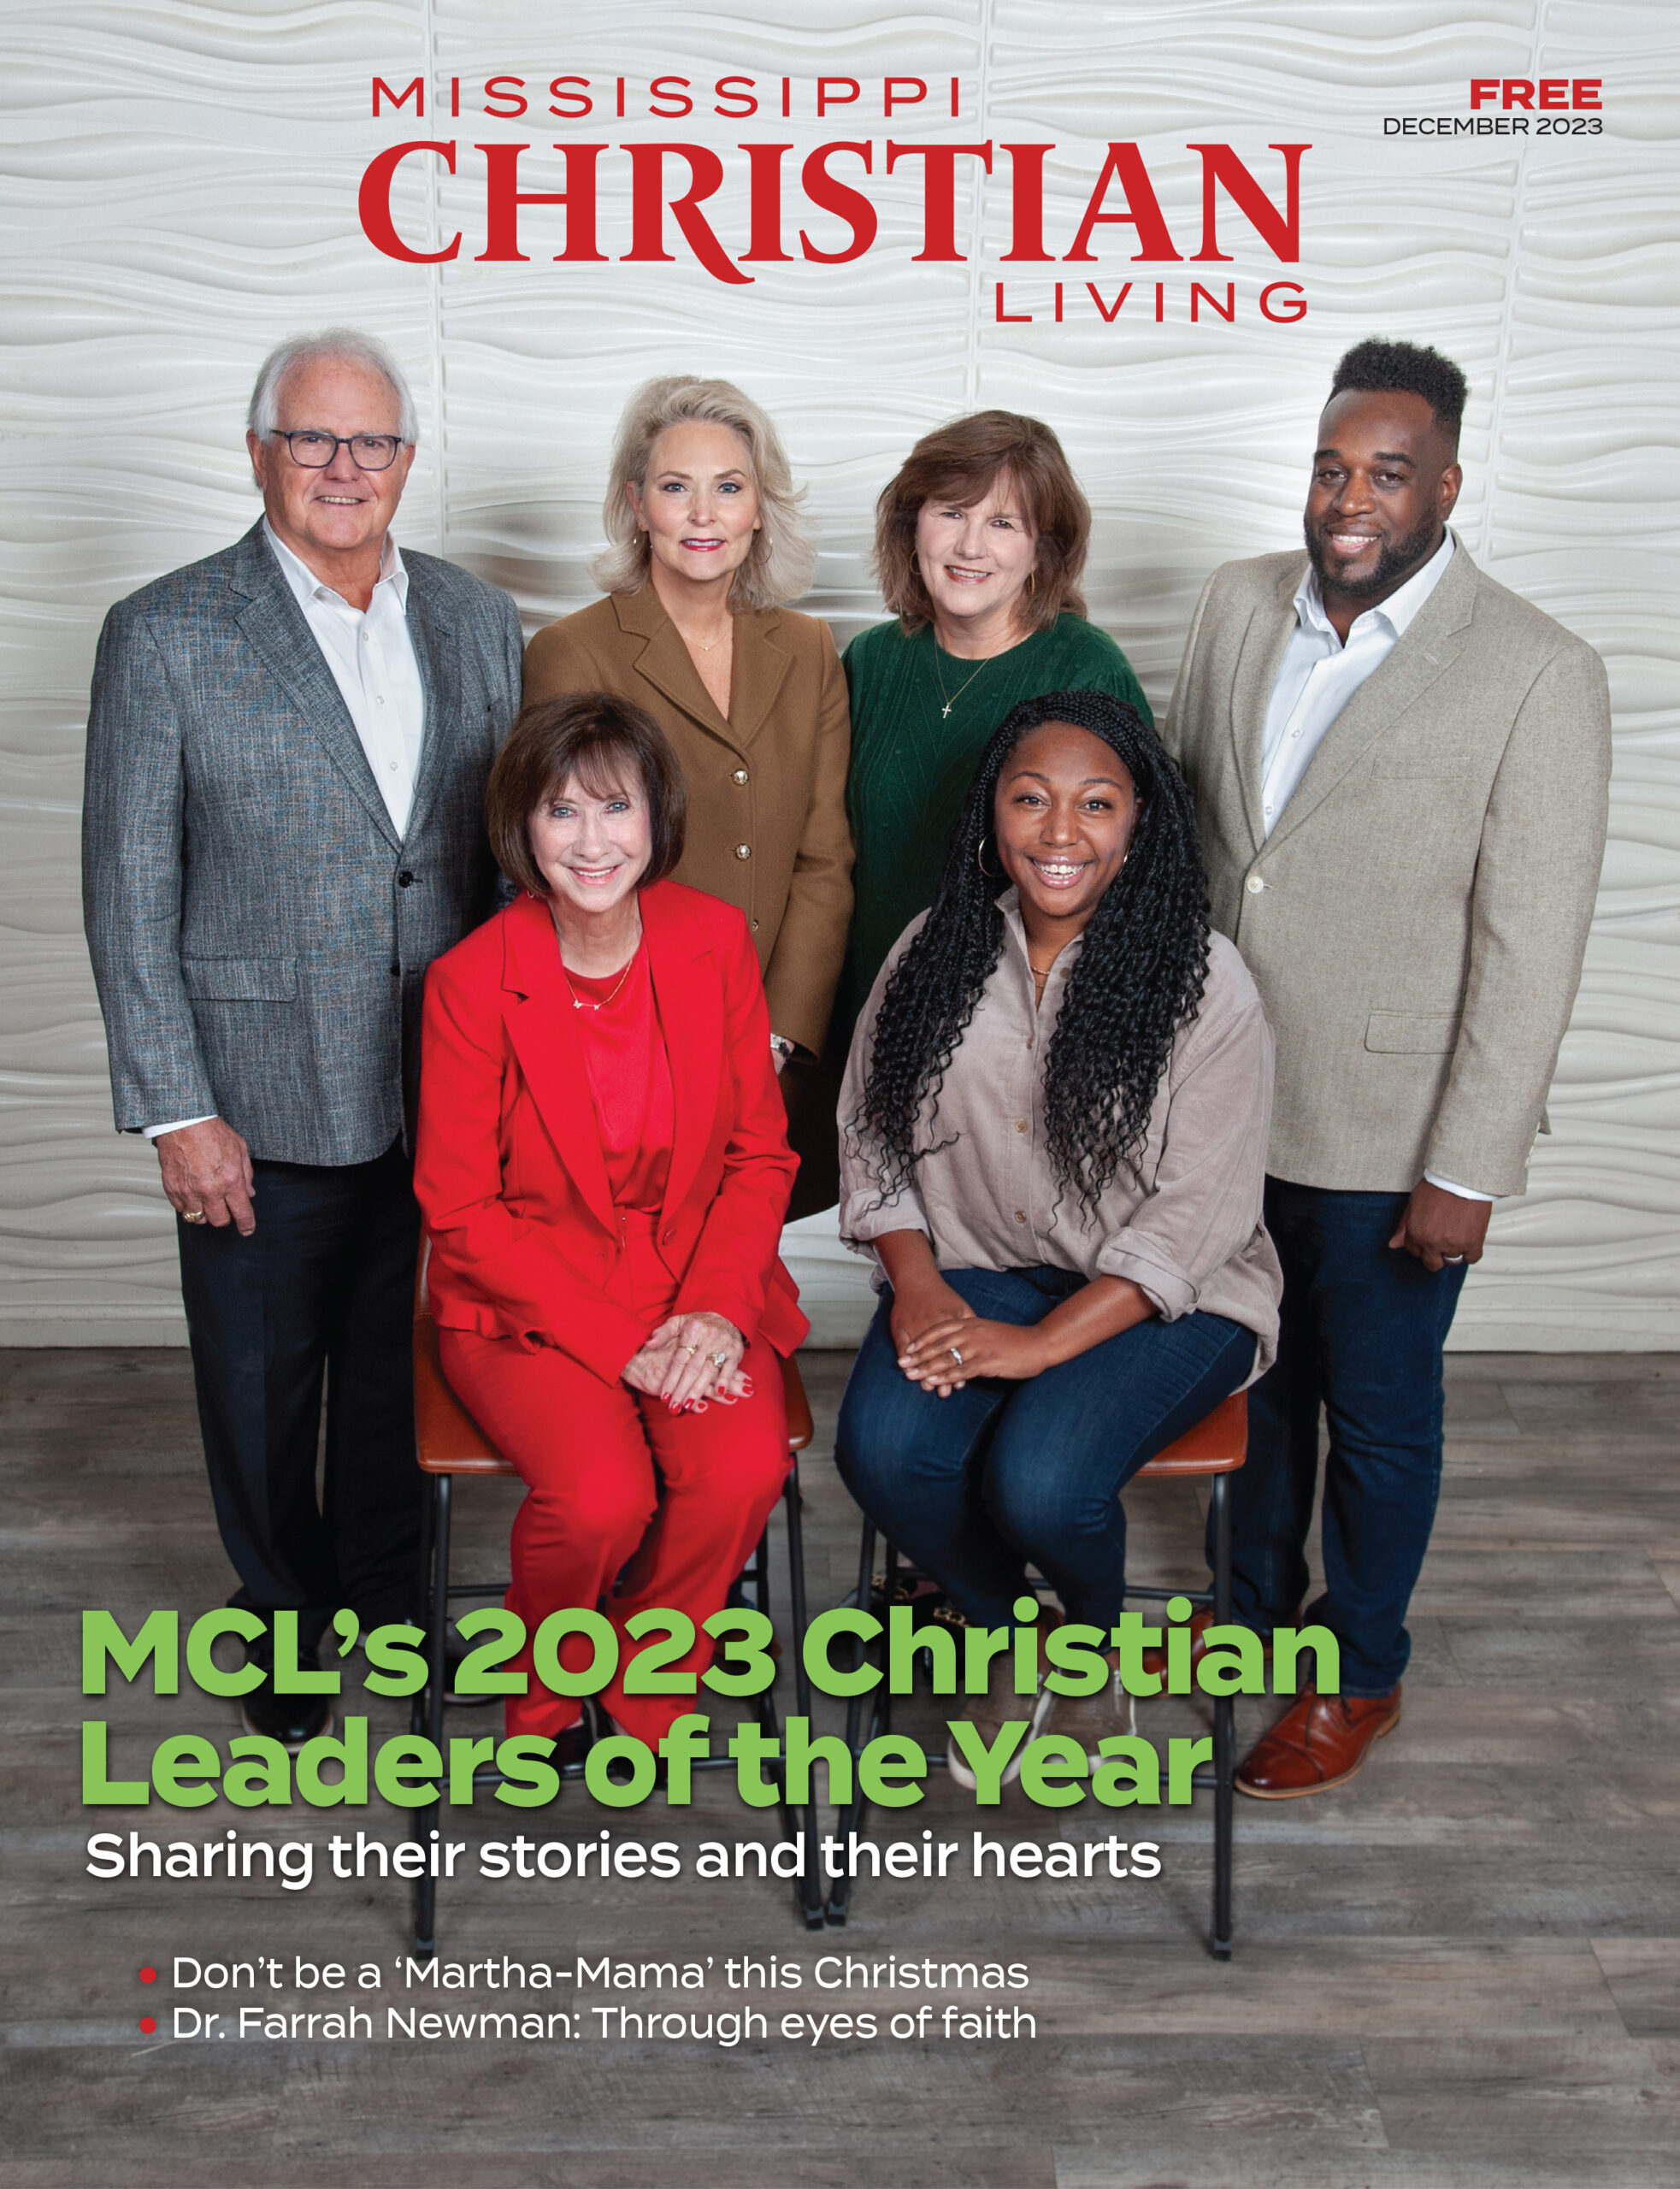 MCL_s 2023 Christian Leaders of the Year